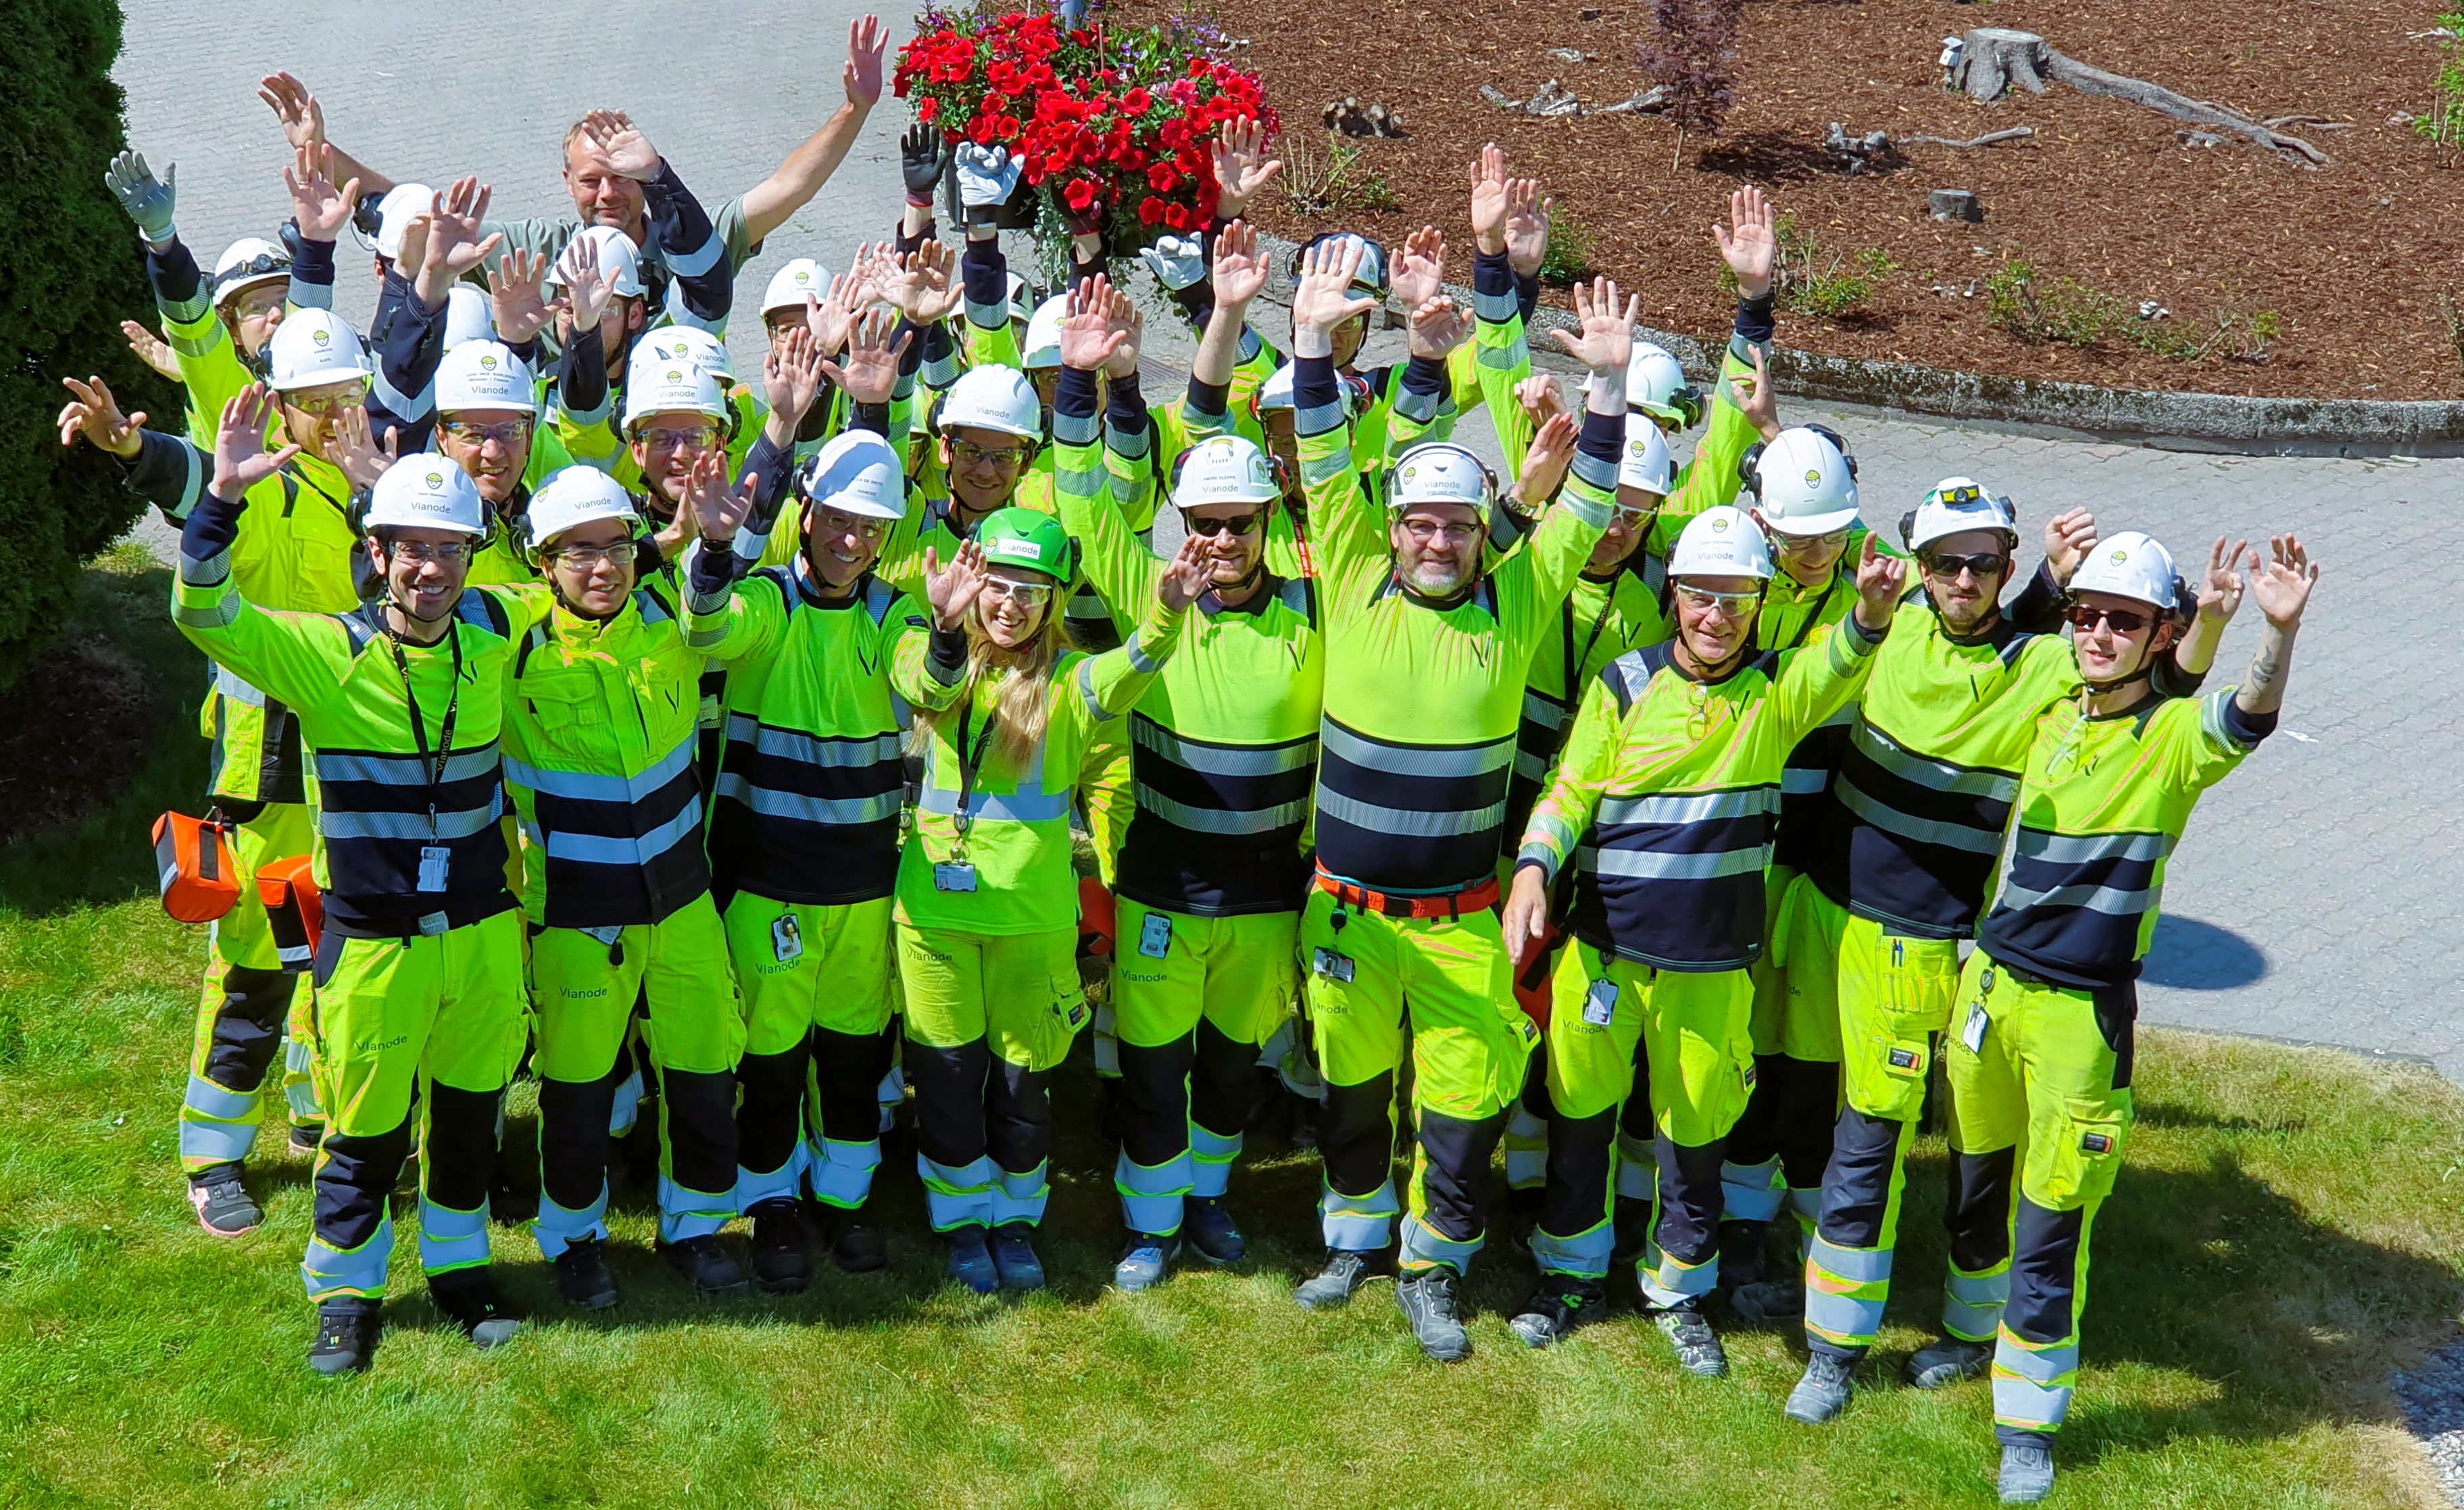 group of new employees, about 30 people, stand close together and look towards the photographer who is at the height, they stretch their arms in the air. All dressed in yellow and blue work clothes and helmets with chin straps.